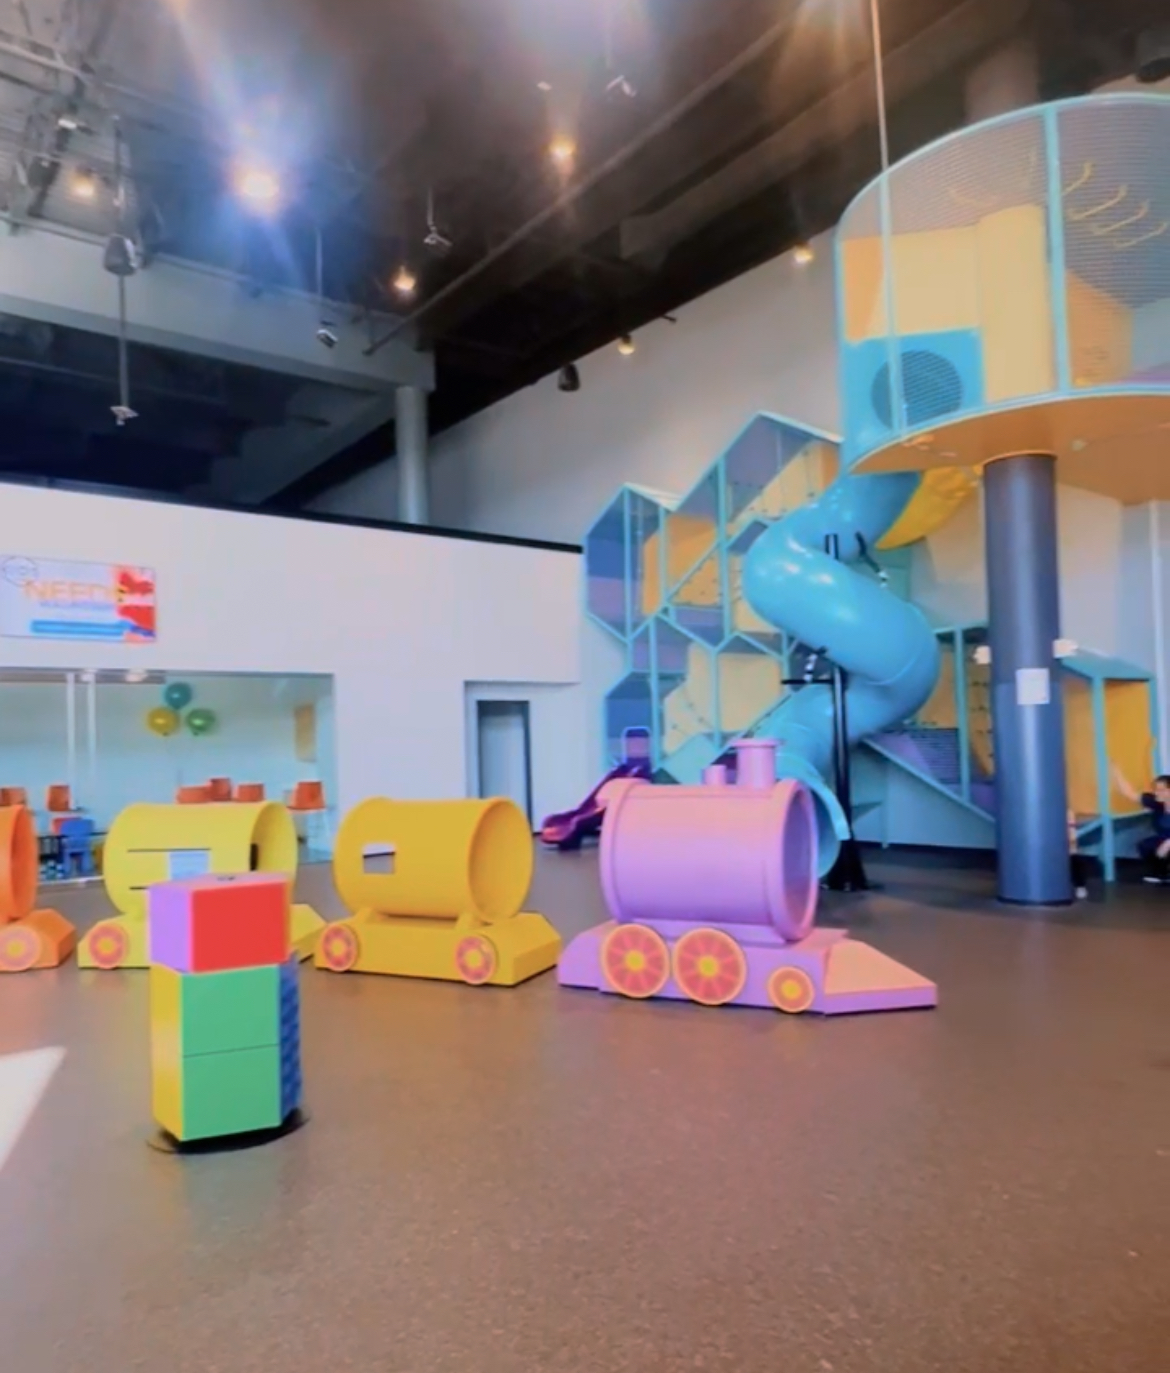 Irving Bible Church "The Tubes" Indoor Playground